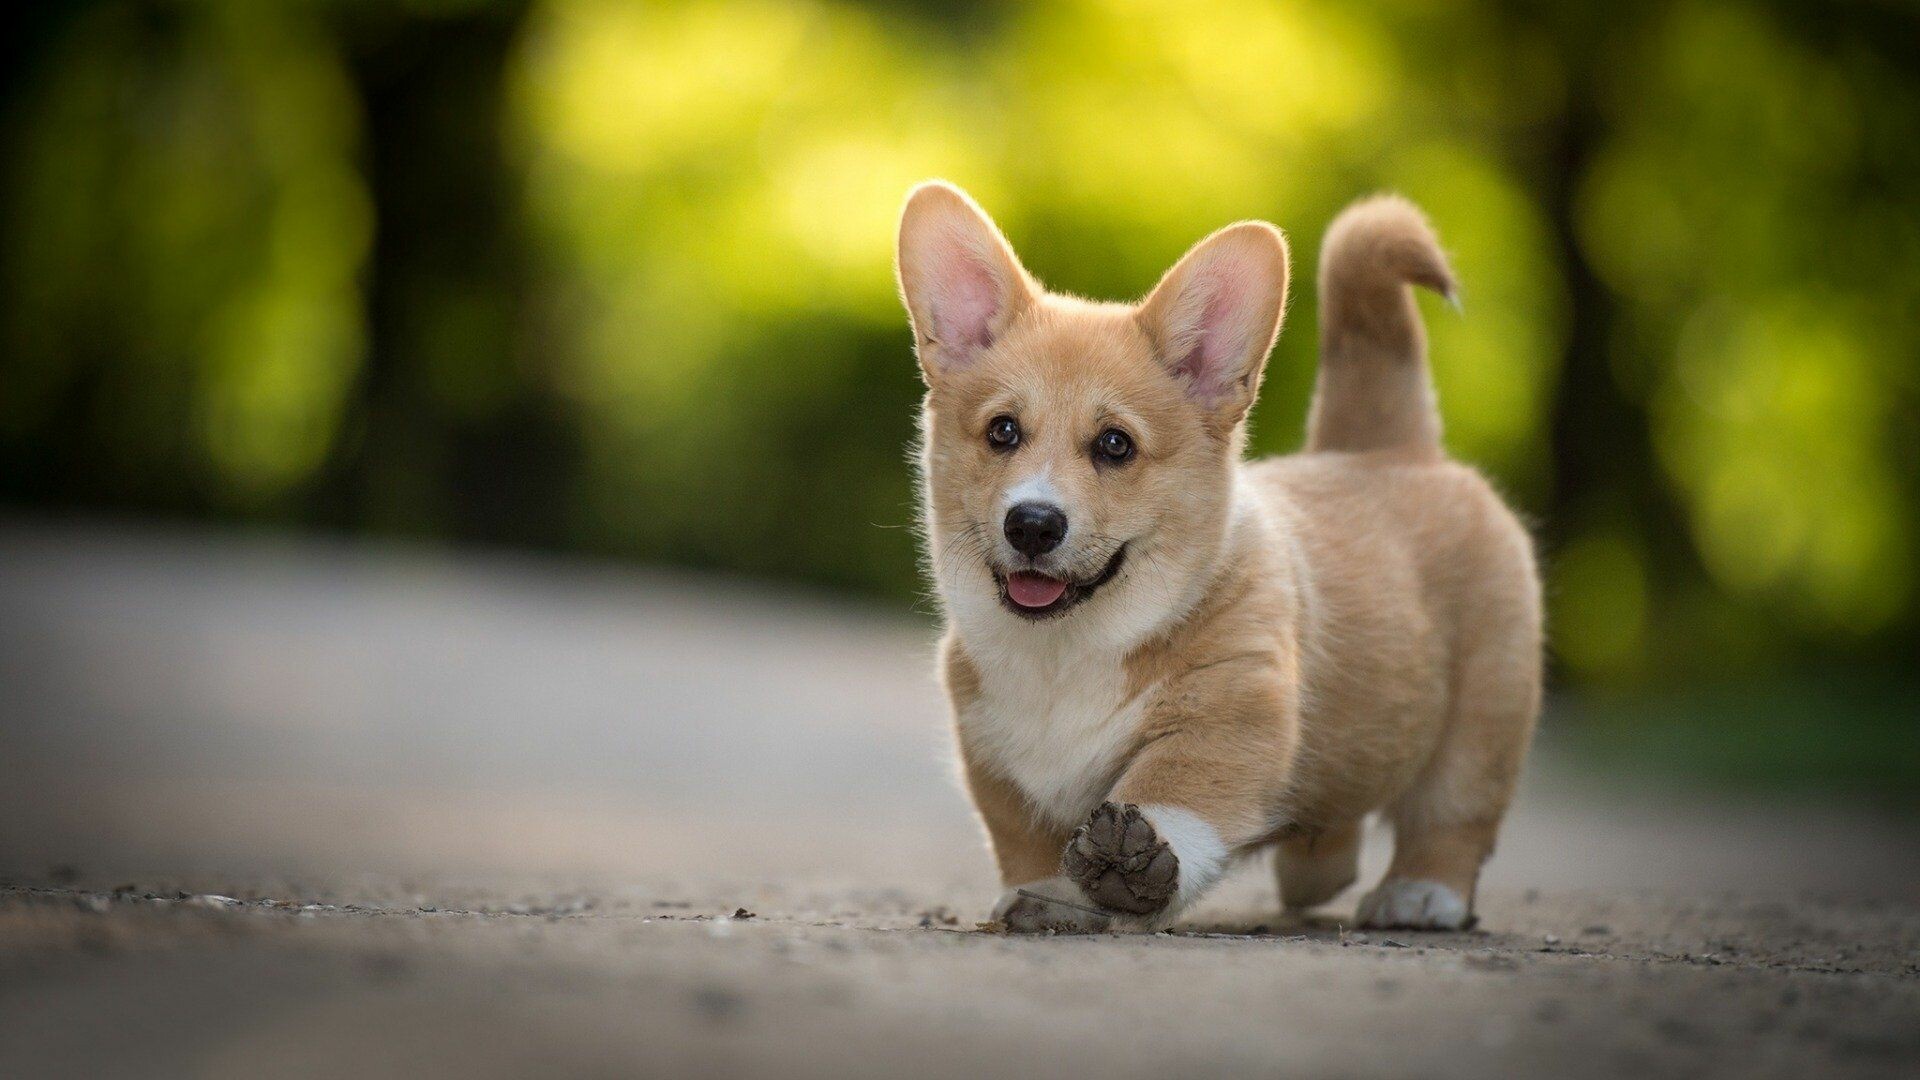 Corgi: The breed can be red, sable, fawn, and black and tan, with or without white markings. 1920x1080 Full HD Wallpaper.